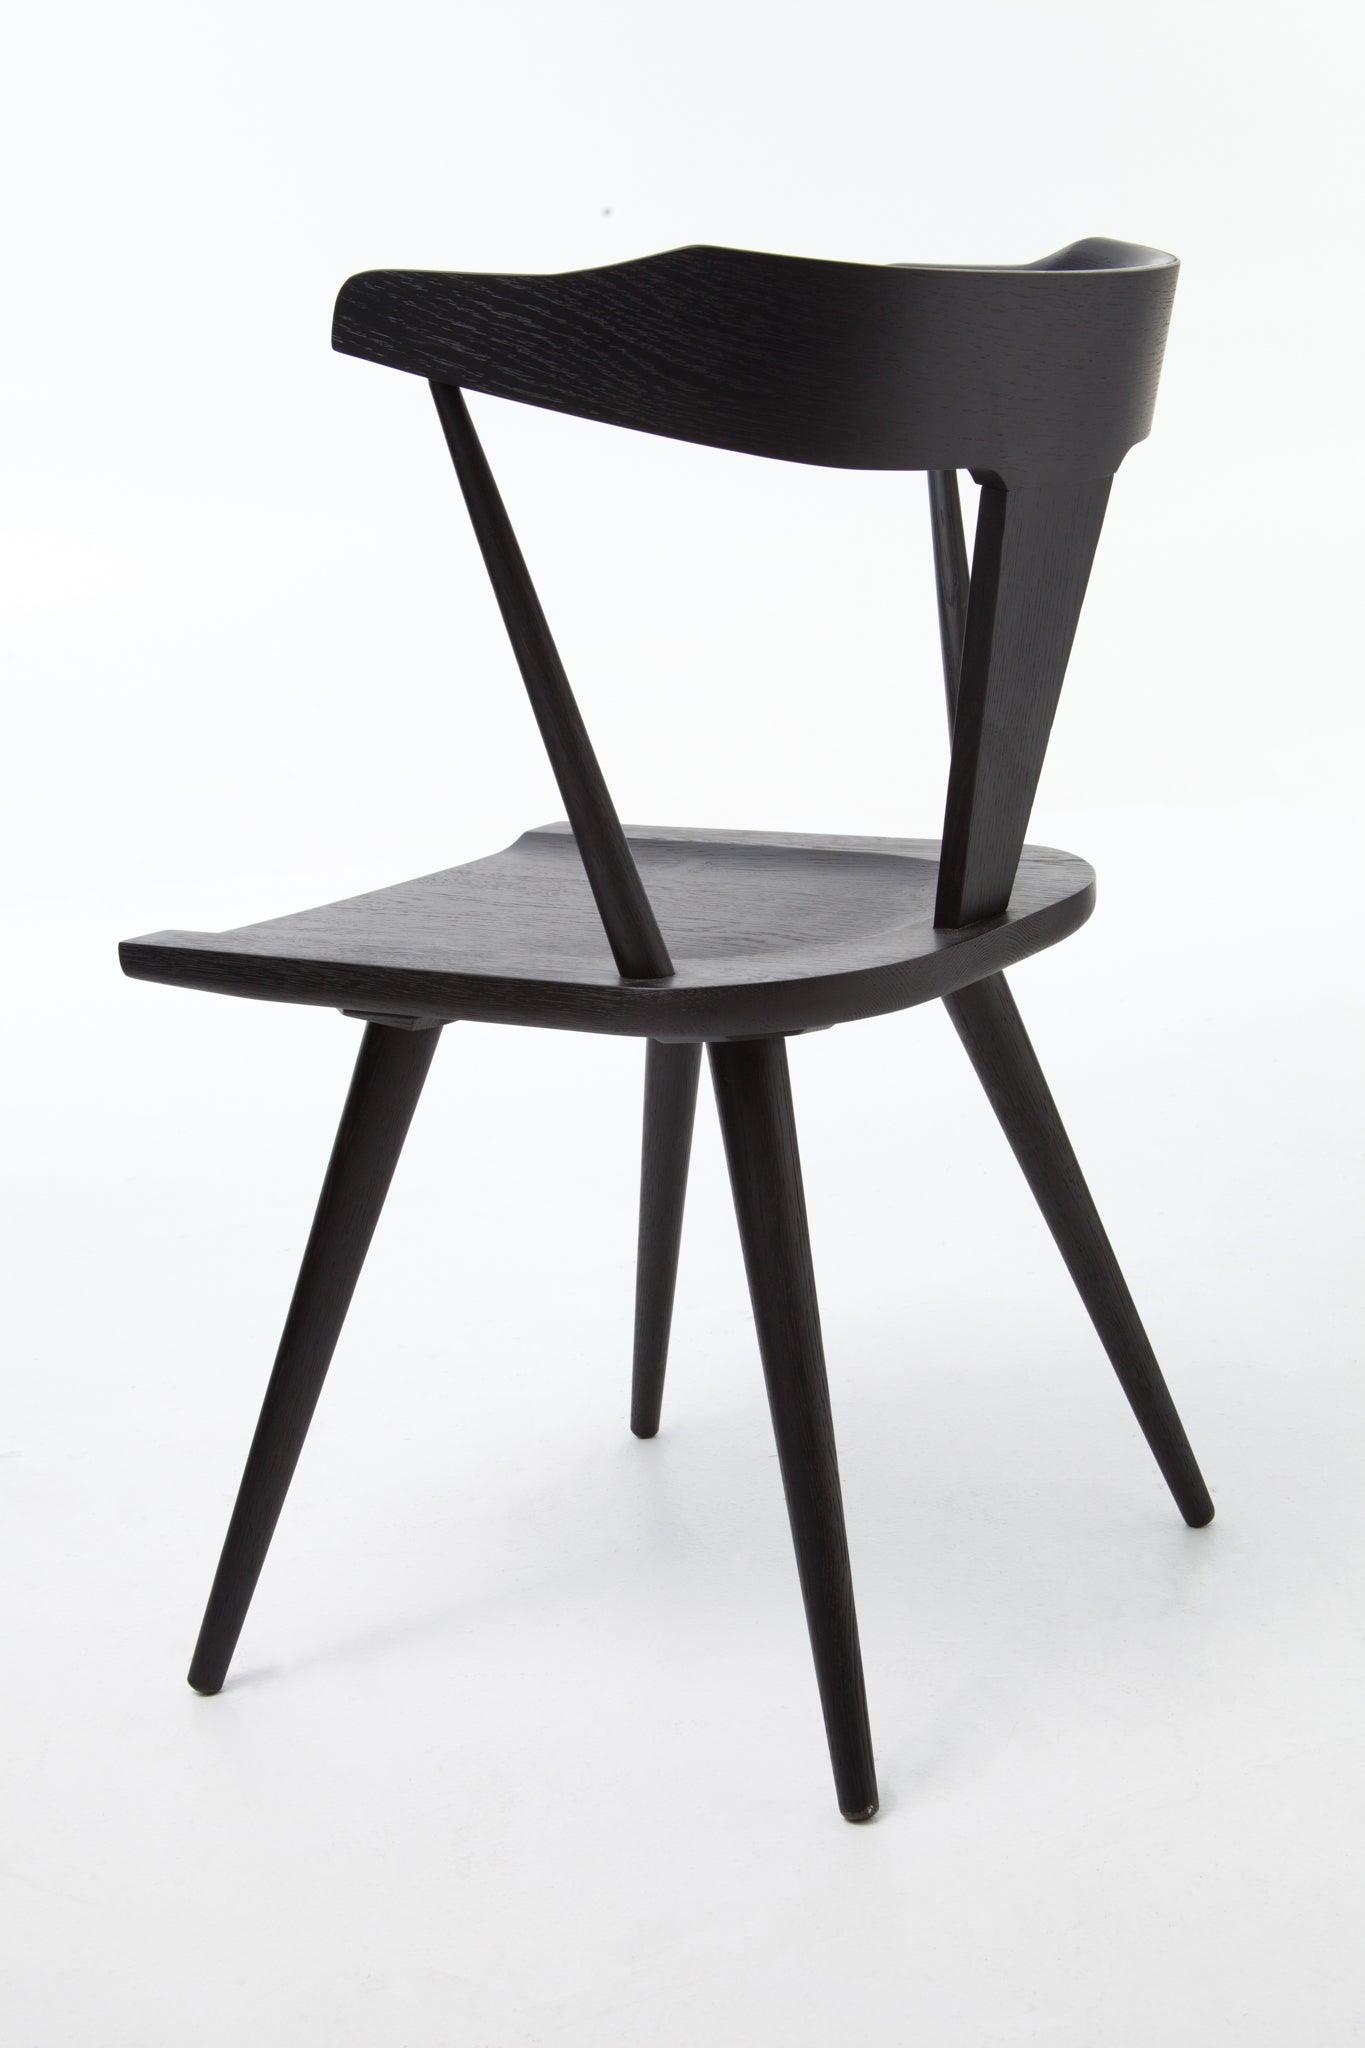 Ripley Dining Chair, Black - Reimagine Designs - Dining Chair